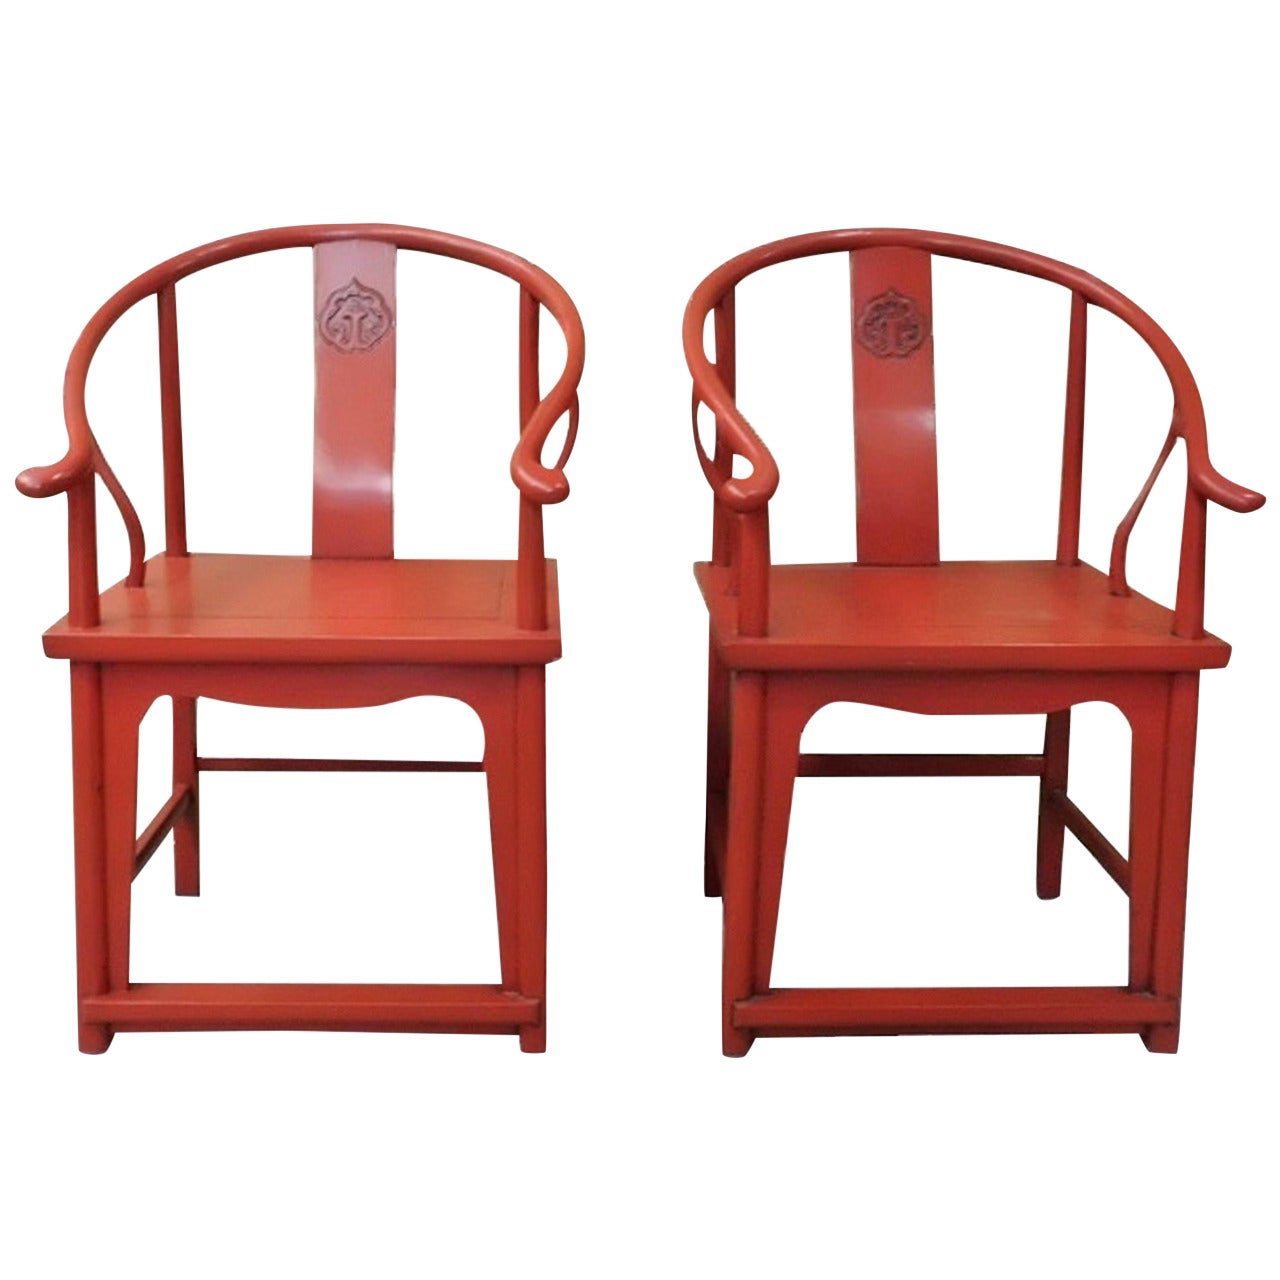 Pair Chinese Ming Style Red Lacquer Horseshoe Chairs